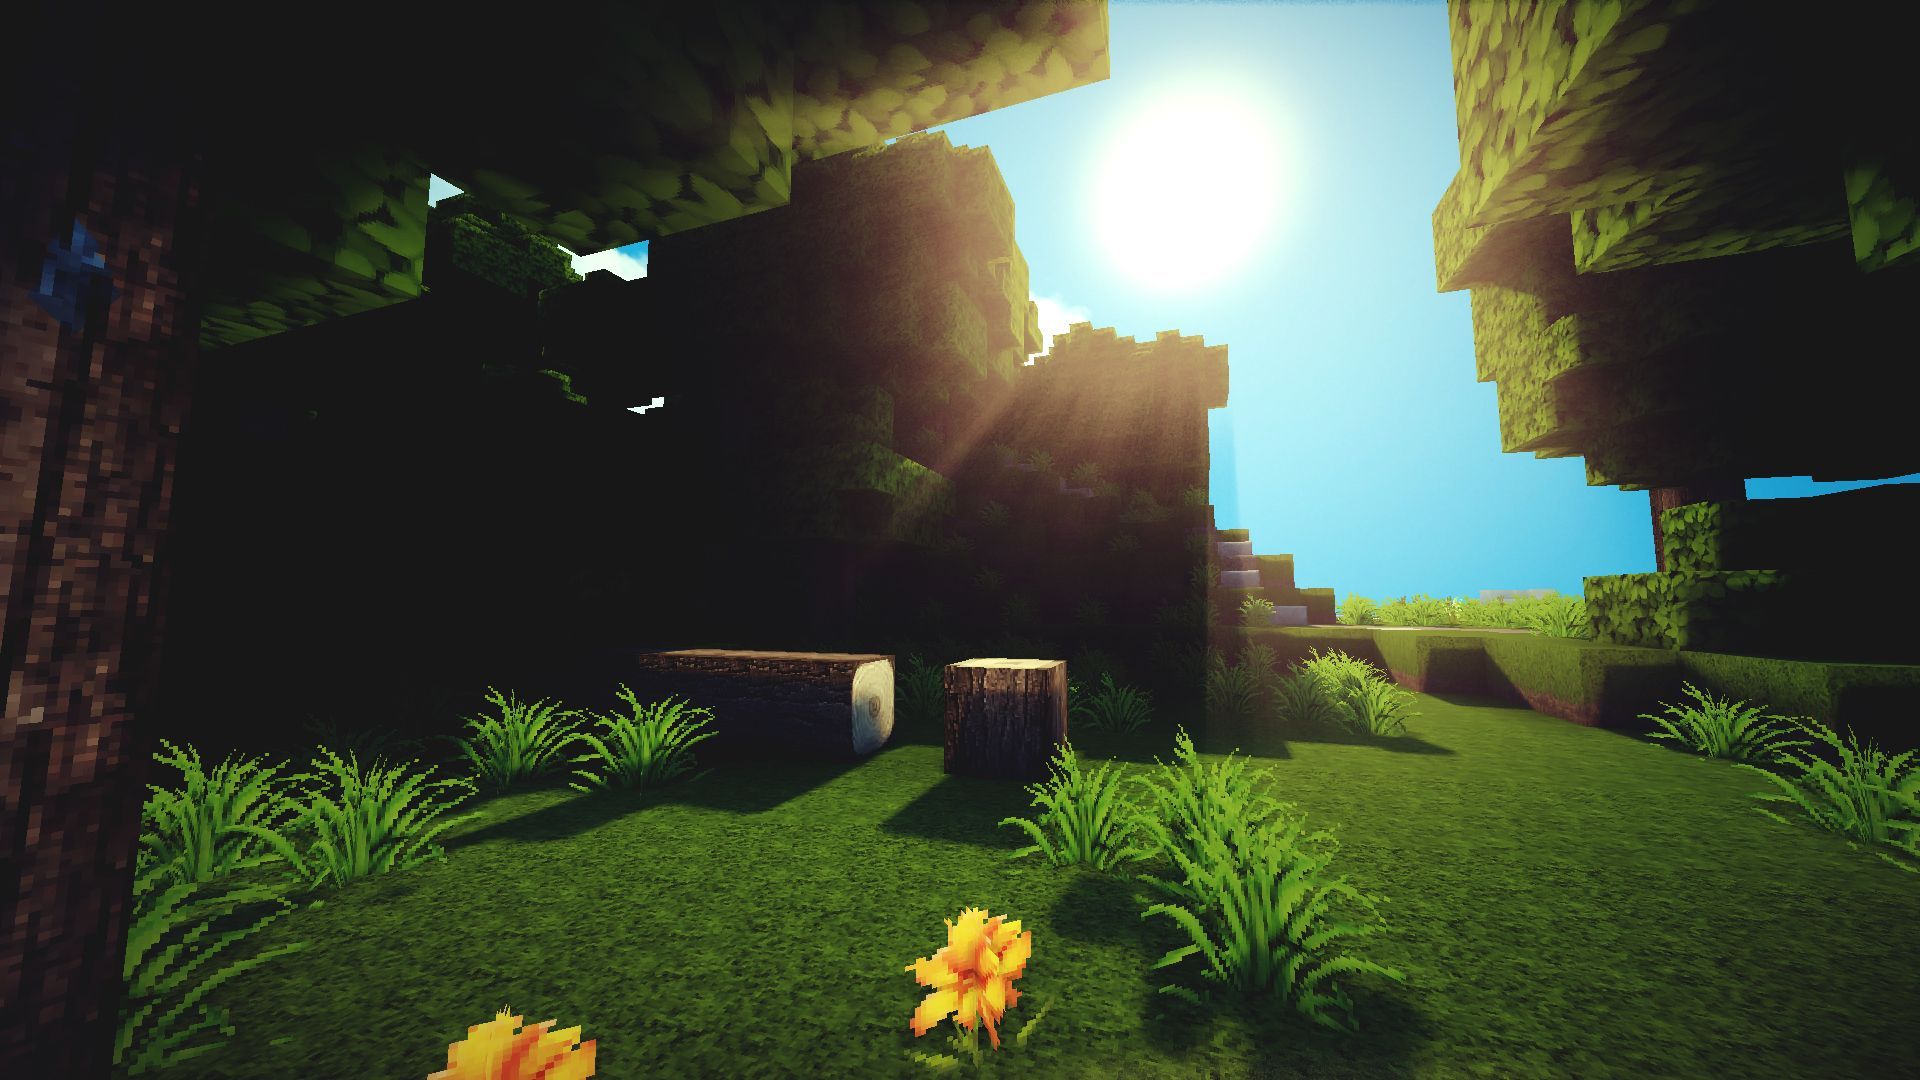 Awesome minecraft Background Free Wallpapers 12308 - HD Wallpapers